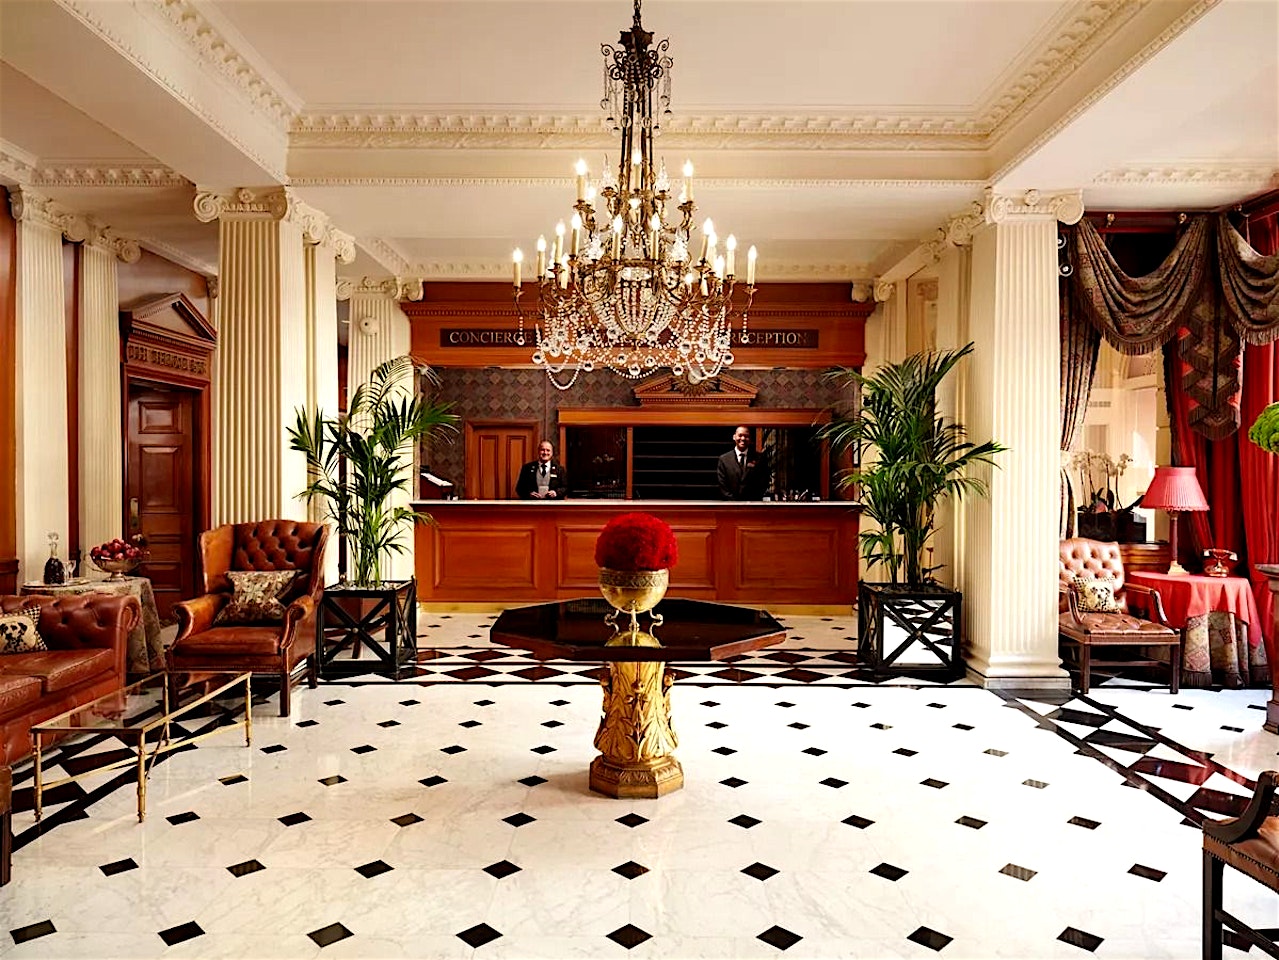 Charles Suite Chesterfield hotel, function rooms in Mayfair.jpeg